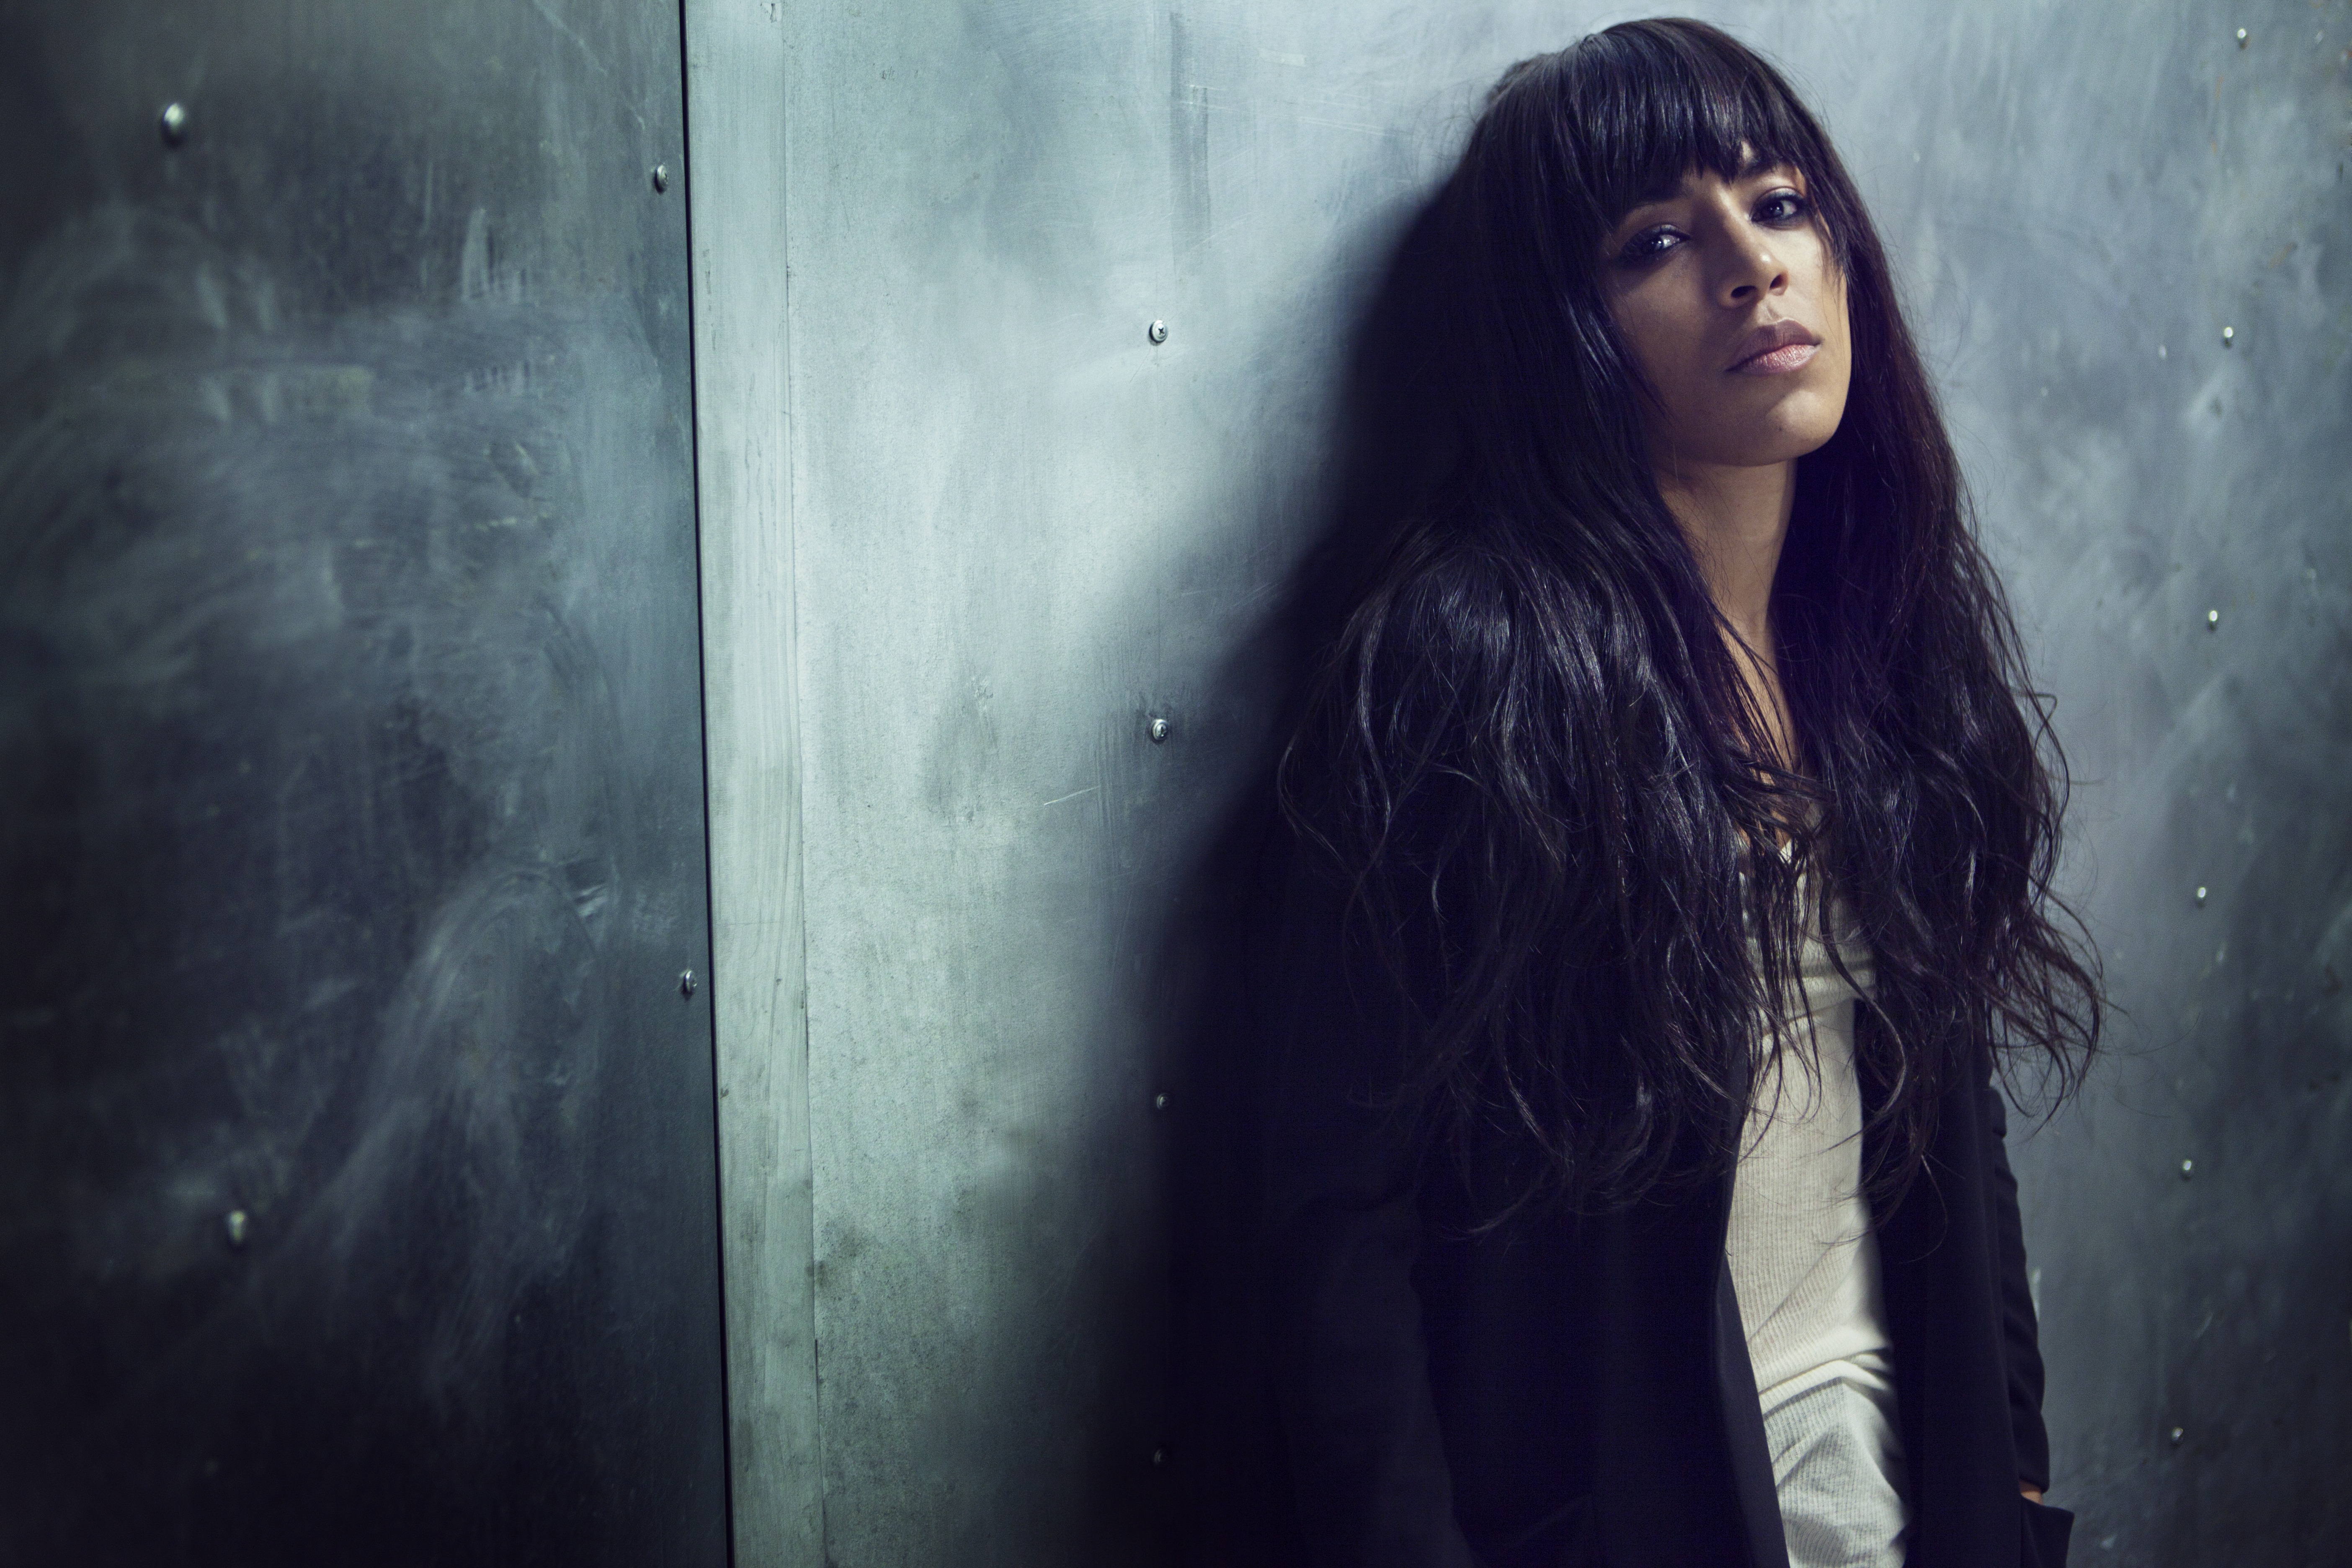 iTunes Australia Forced Early Release of Loreen and Melodifestivalen Tracks